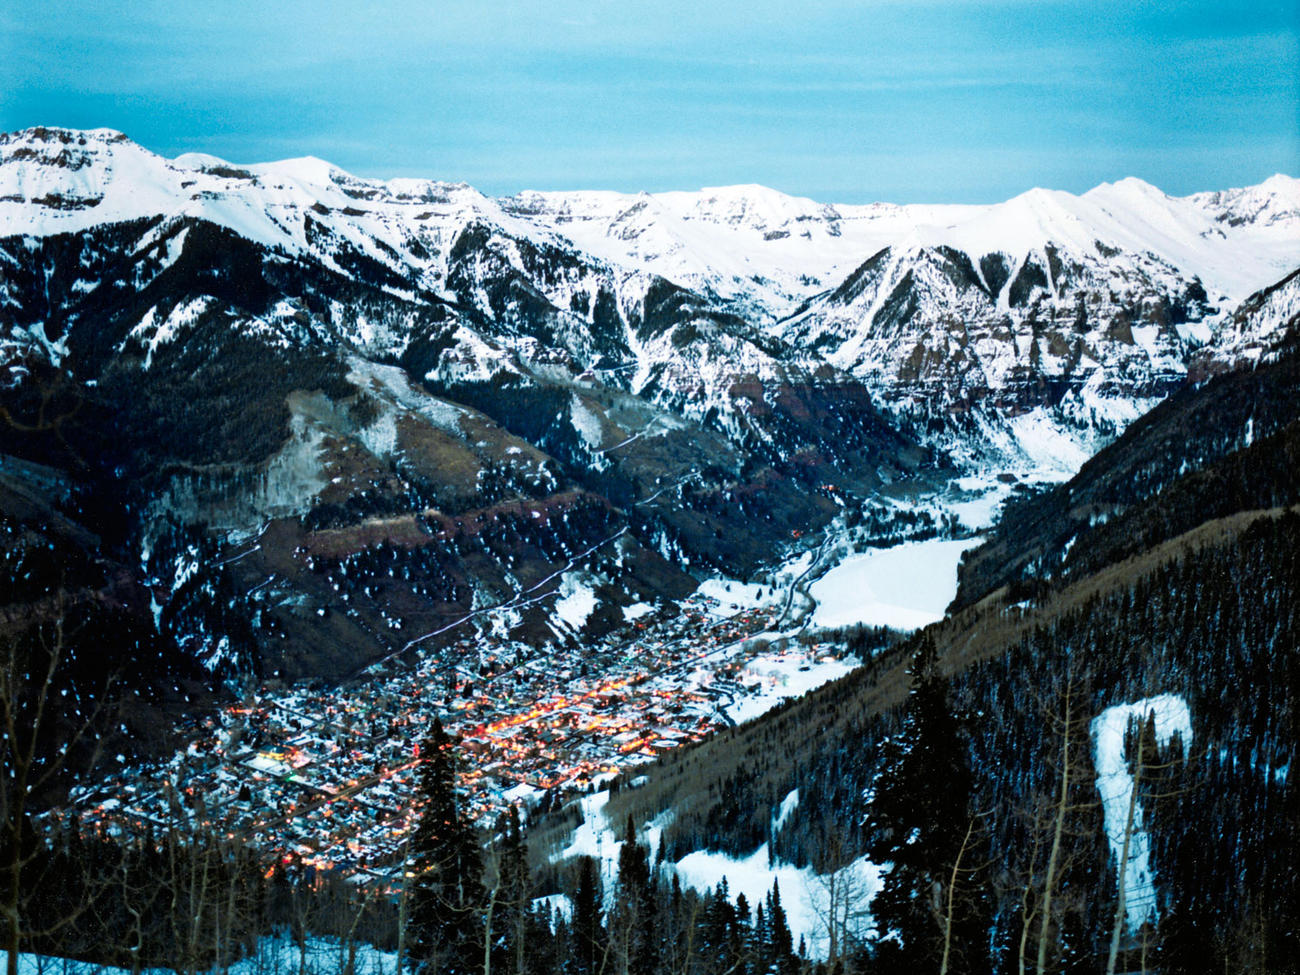 Telluride on a Dime